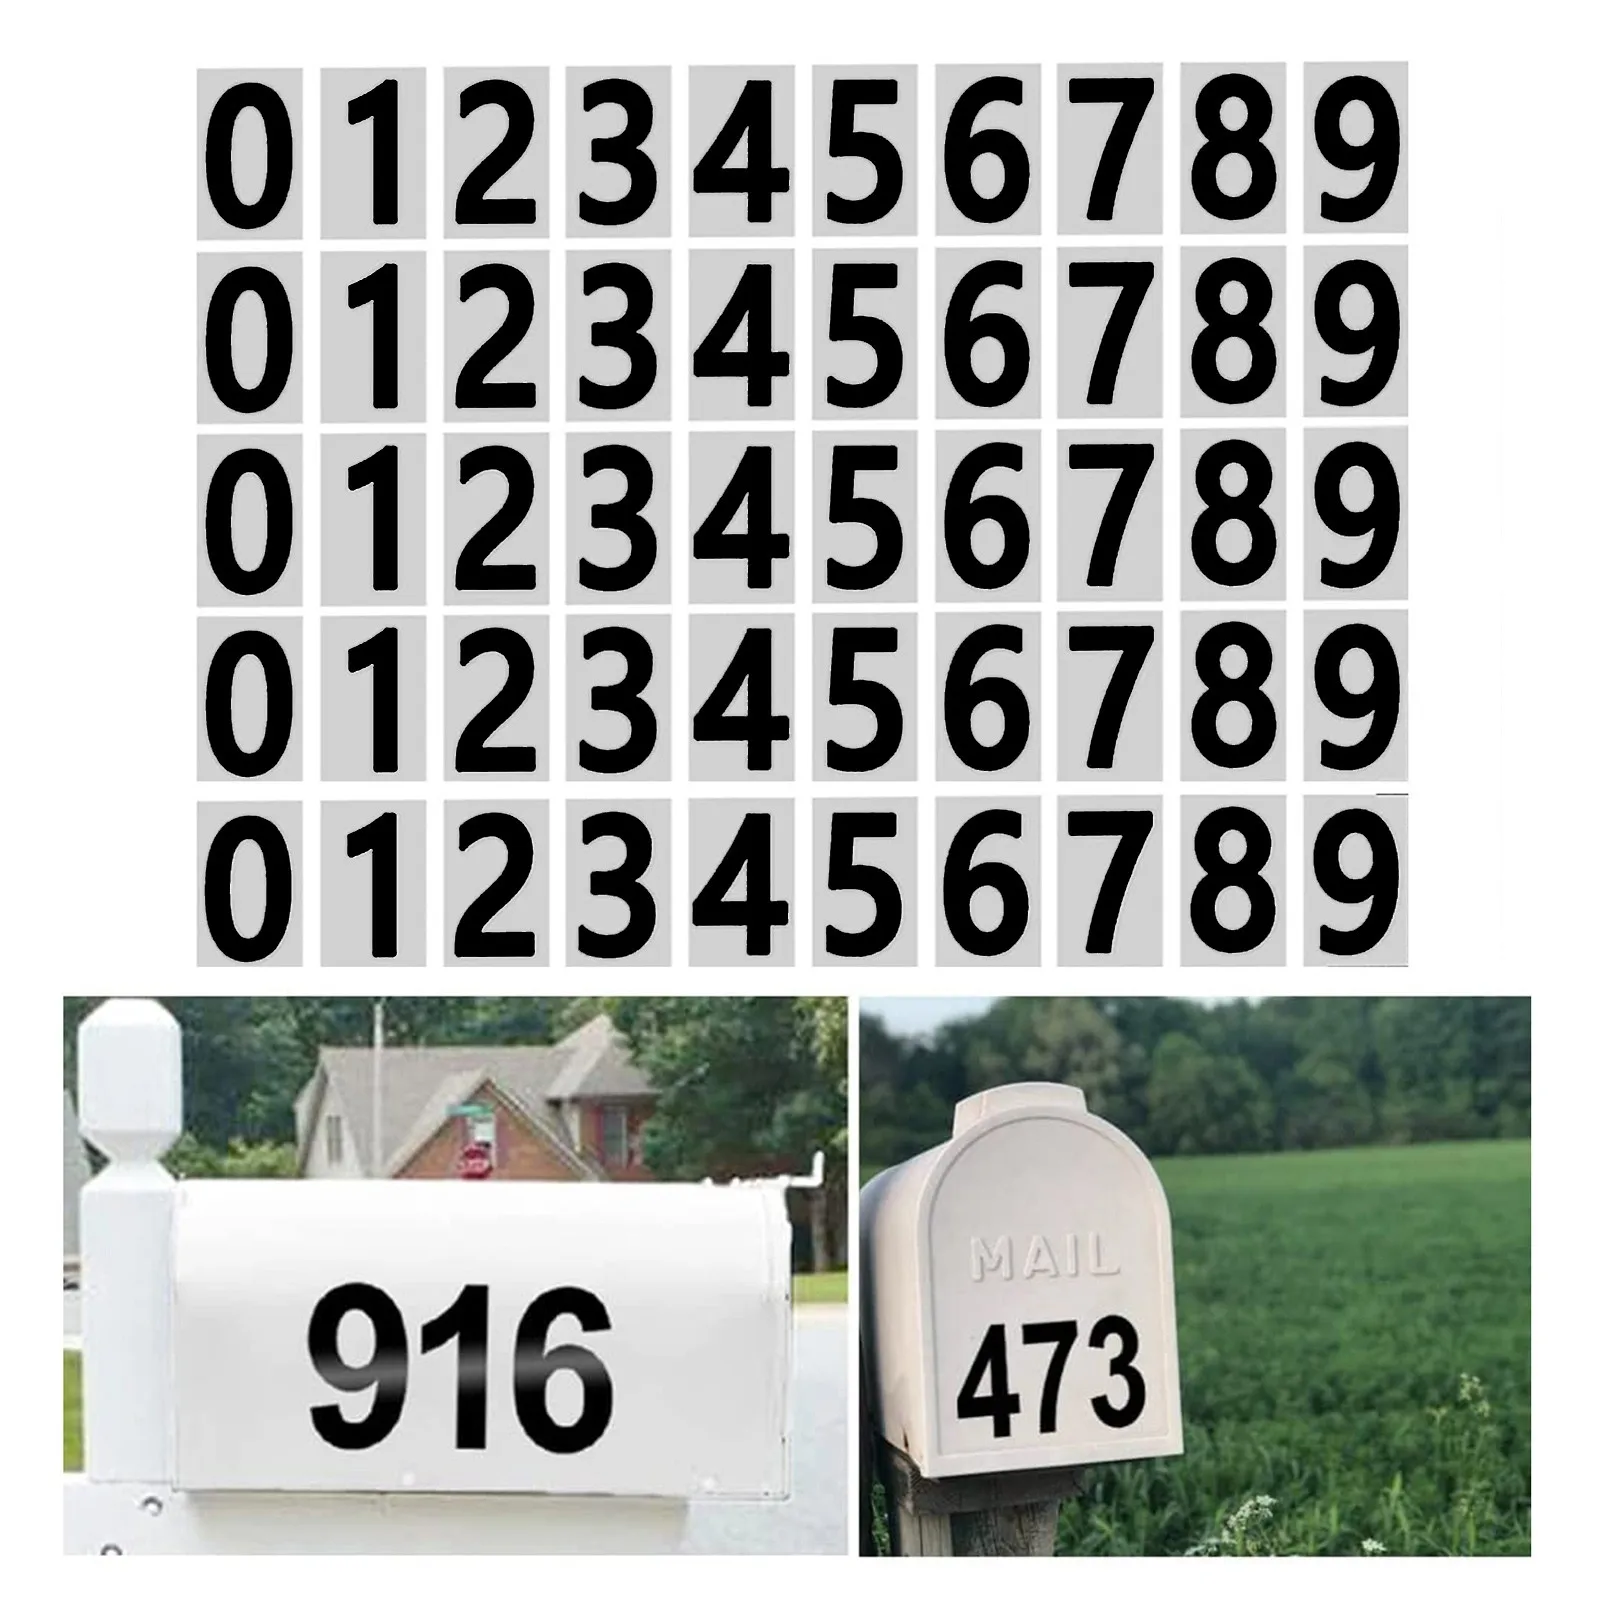 10 Sets 0-9 5" Stickers Vinyl Adhesive Address Numbers Black & White MADE USA 